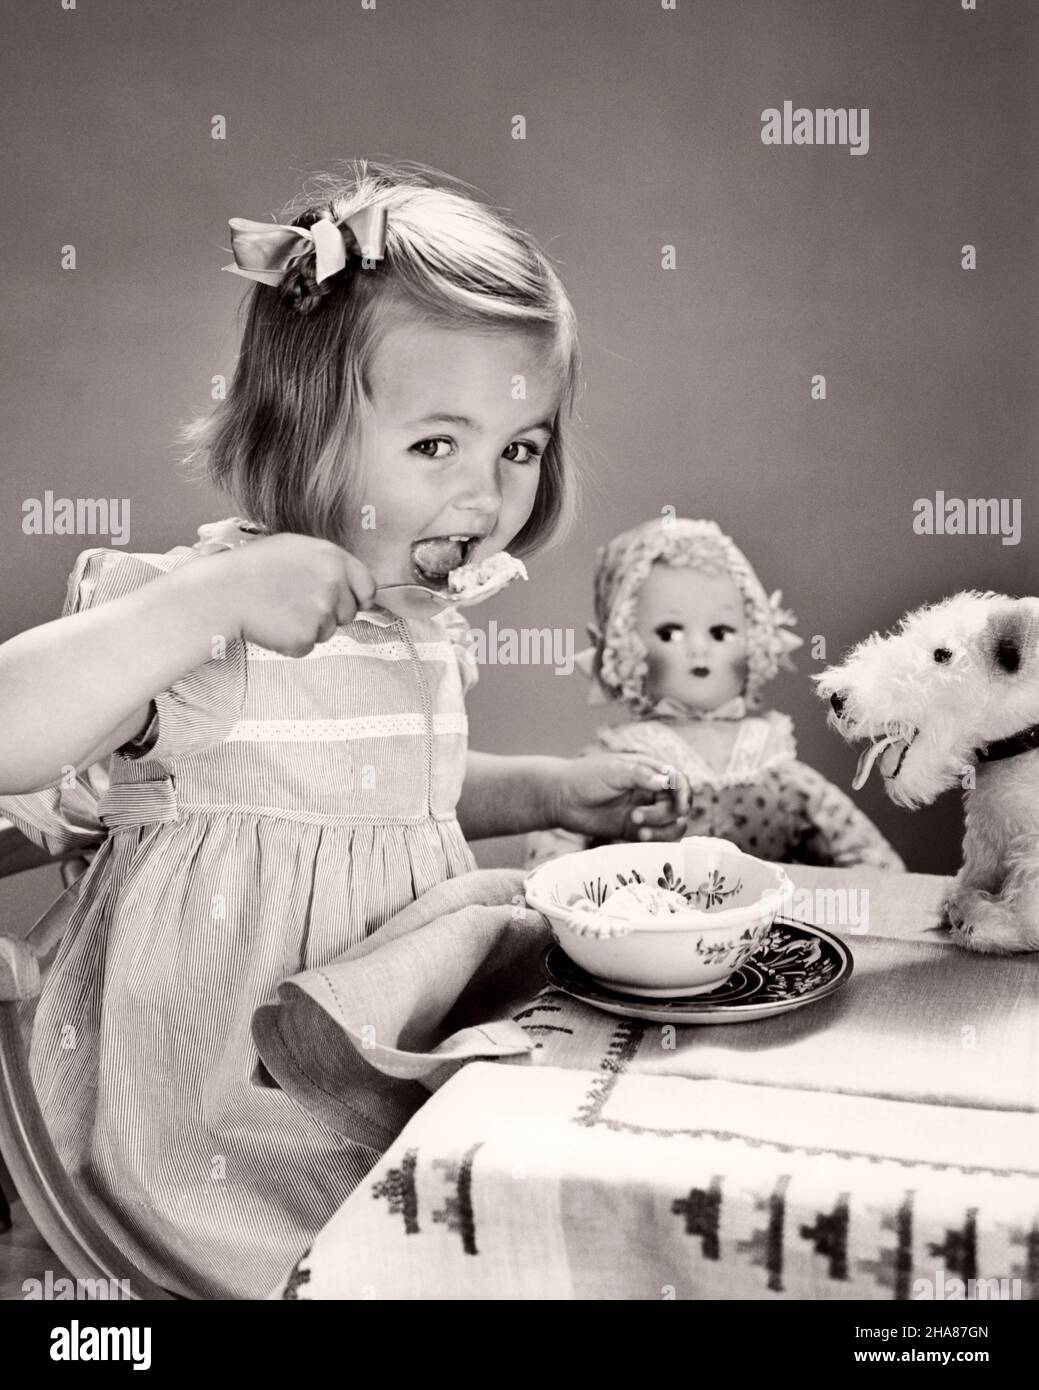 1940s GIRL LOOKING AT CAMERA BOW IN HER HAIR SITTING AT CHILD SIZED TABLE WITH DOLL AND STUFFED TOY DOG EATING BOWL OF ICE CREAM - f1471 HAR001 HARS FEMALES WINNING STUDIO SHOT STUFFED HEALTHINESS TREAT HOME LIFE COPY SPACE HALF-LENGTH B&W EYE CONTACT HUMOROUS HAPPINESS AND EXCITEMENT NUTRITION COMICAL COMEDY CONSUME CONSUMING NOURISHMENT ICE CREAM PLEASANT AGREEABLE CHARMING GROWTH JUVENILES LOVABLE PLEASING REFRESHING ADORABLE APPEALING BLACK AND WHITE CAUCASIAN ETHNICITY HAR001 OLD FASHIONED Stock Photo